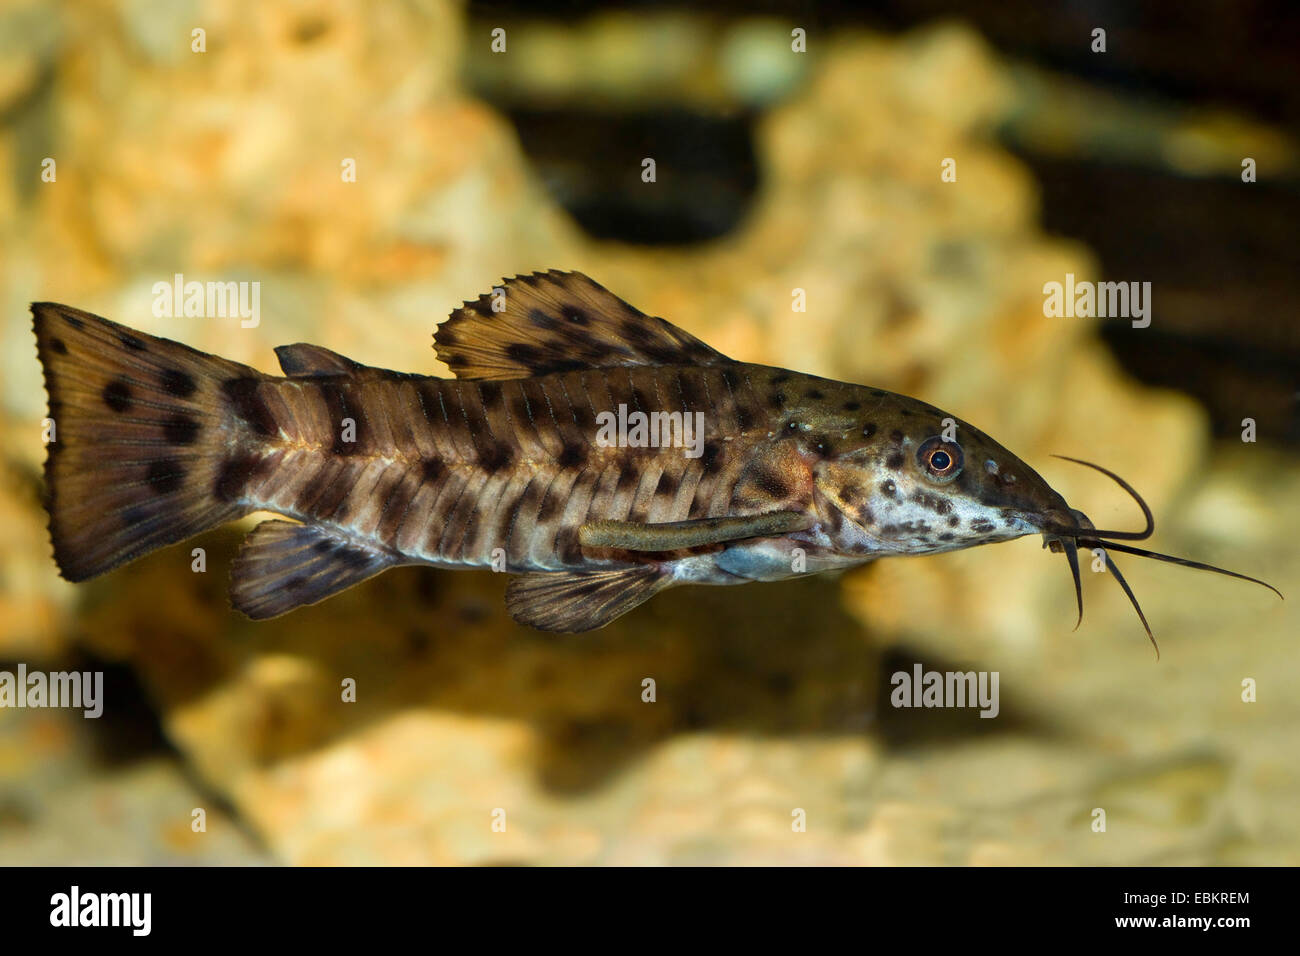 Bubblenest catfish, Spotted Hoplo (Hoplosternum thoracatum, Megalechis thoracata), full length portrait Stock Photo